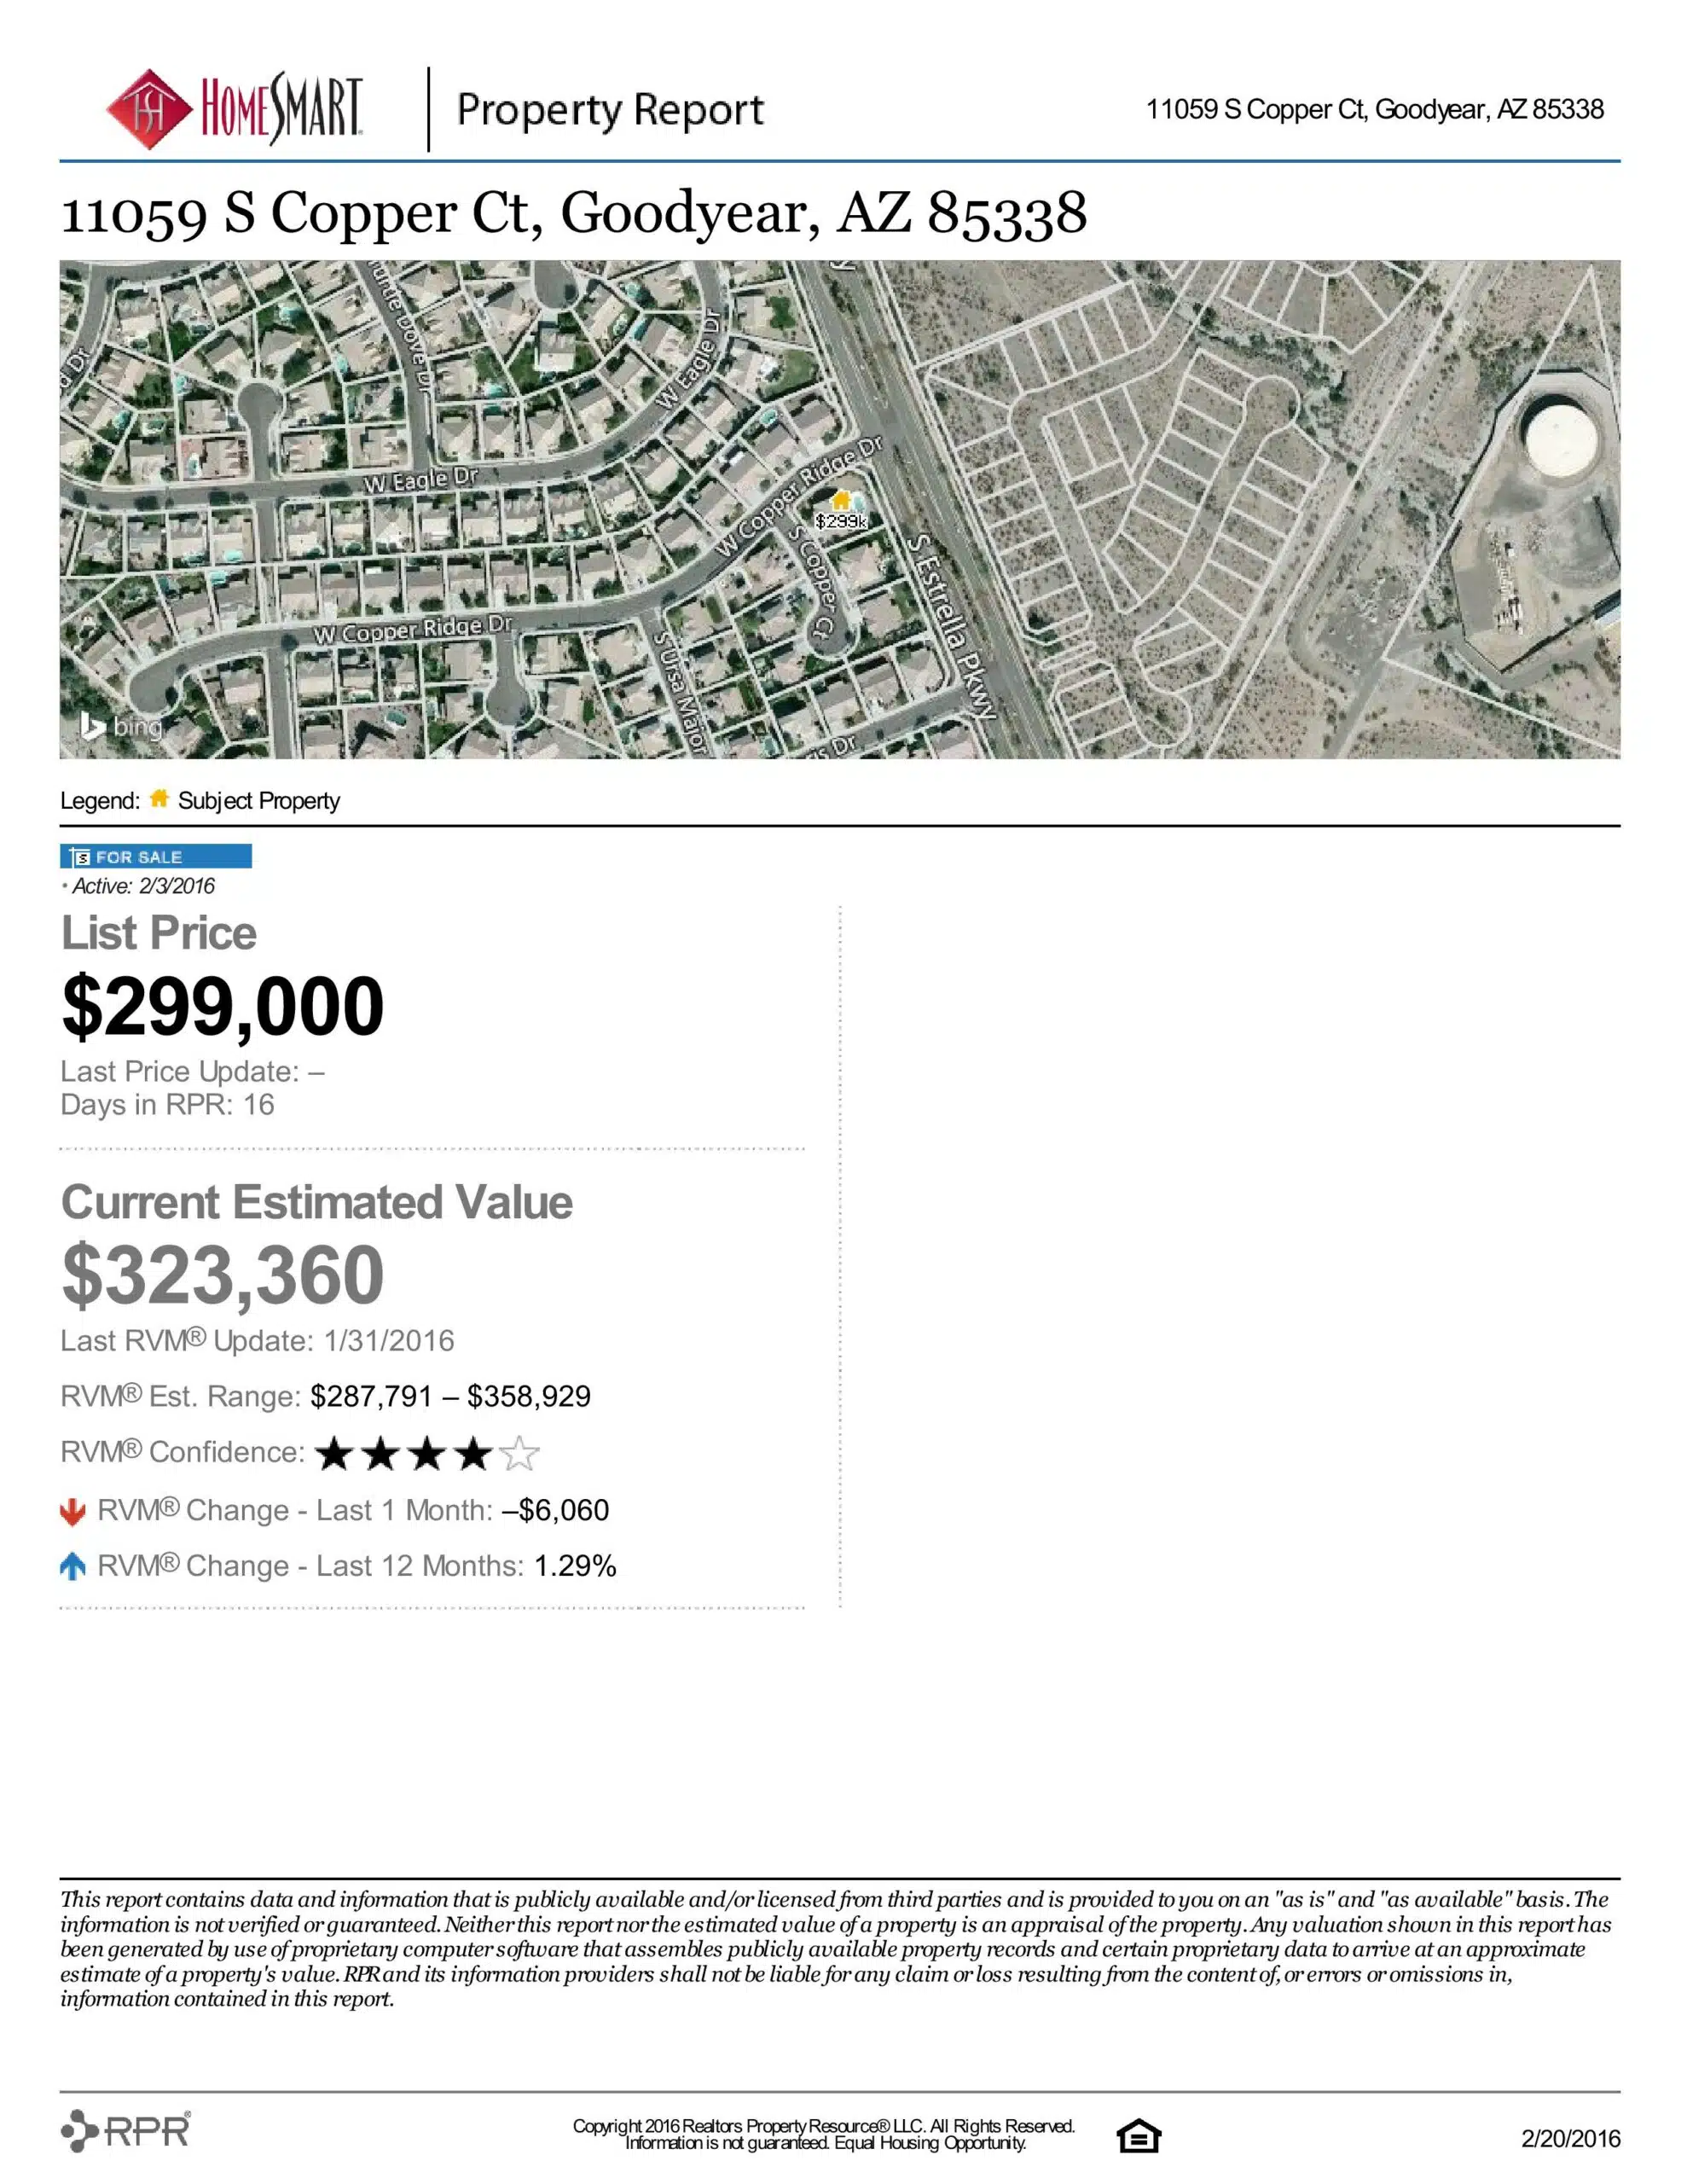 11059 S Copper Ct Location On The Map And List Price And Current Estimated Value